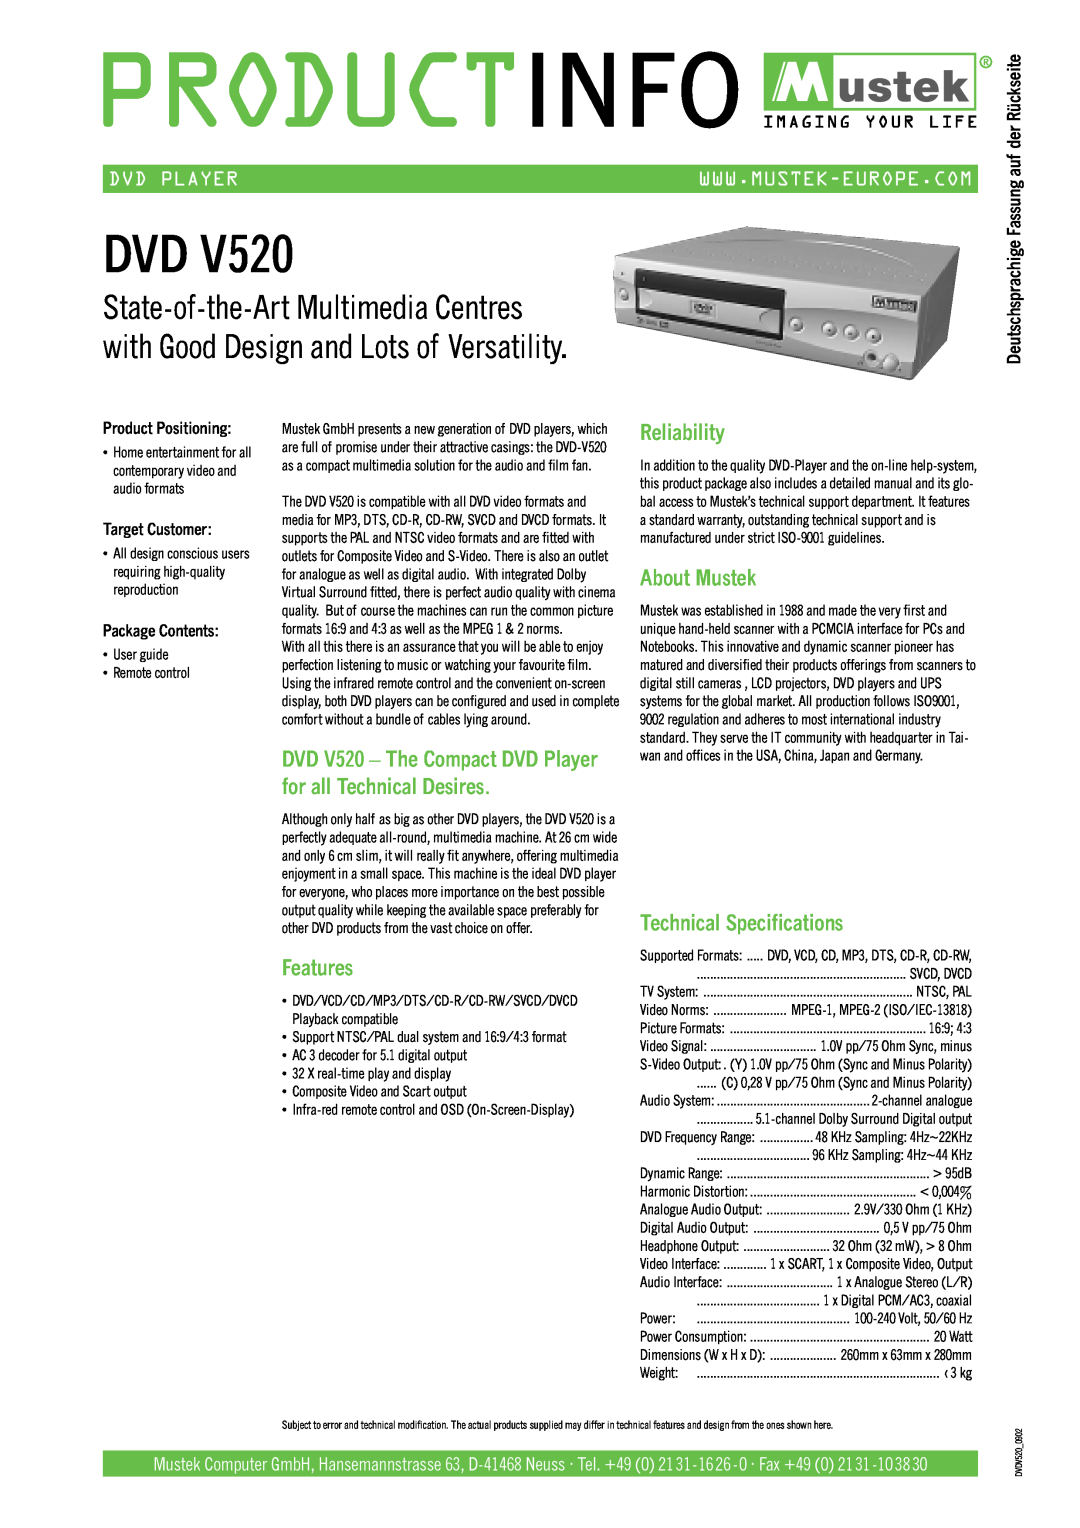 Mustek V520 technical specifications Features, Reliability, About Mustek, Technical Specifications, Dvd Player 